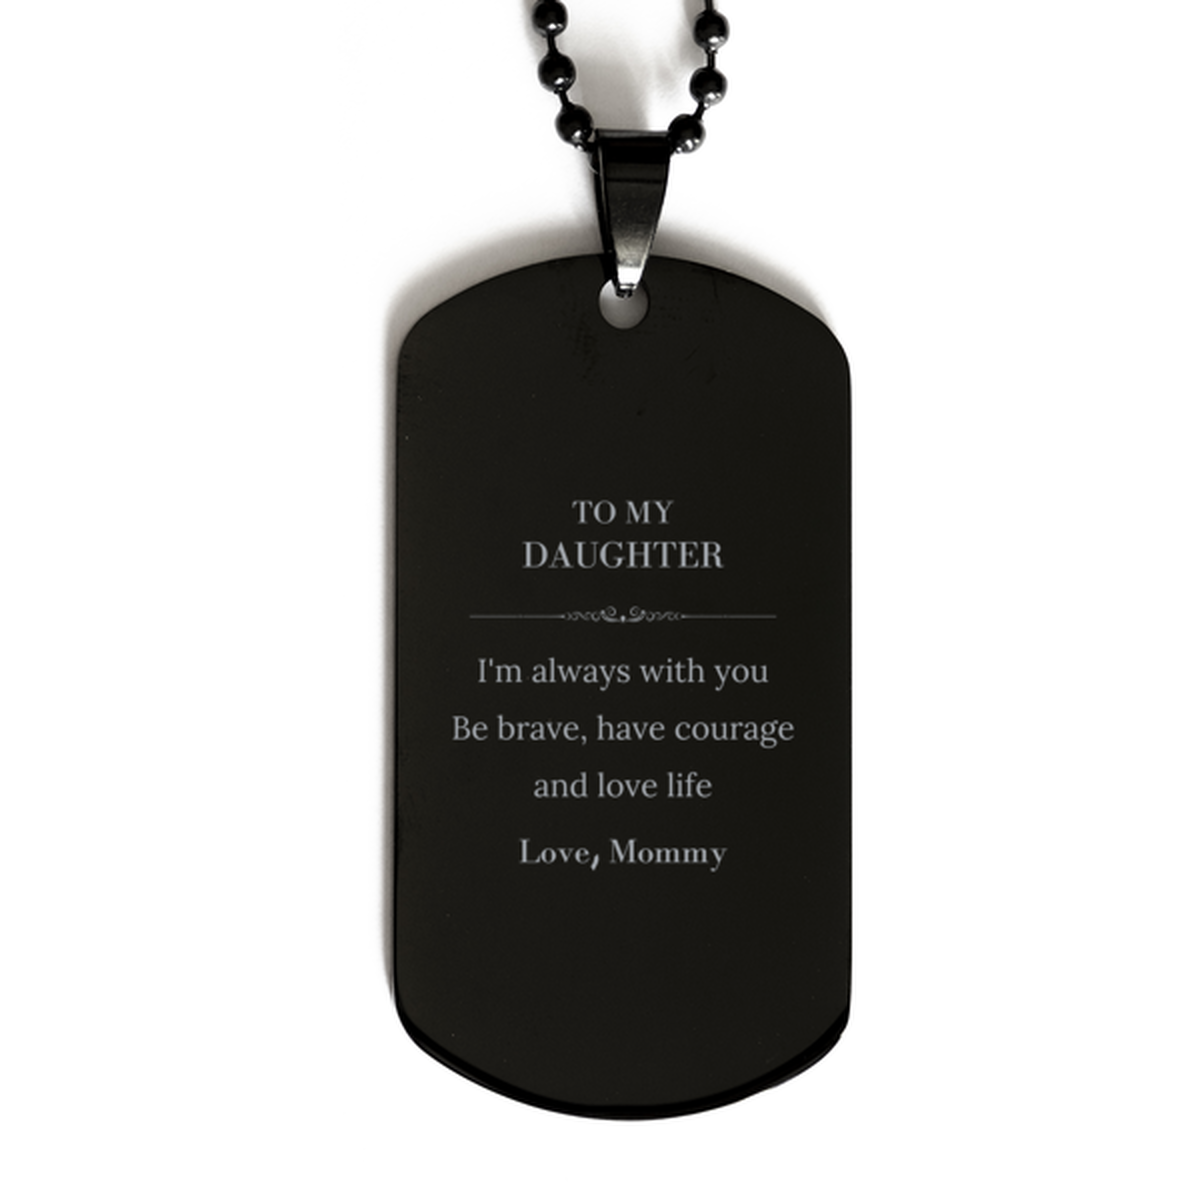 To My Daughter Gifts from Mommy, Unique Black Dog Tag Inspirational Christmas Birthday Graduation Gifts for Daughter I'm always with you. Be brave, have courage and love life. Love, Mommy